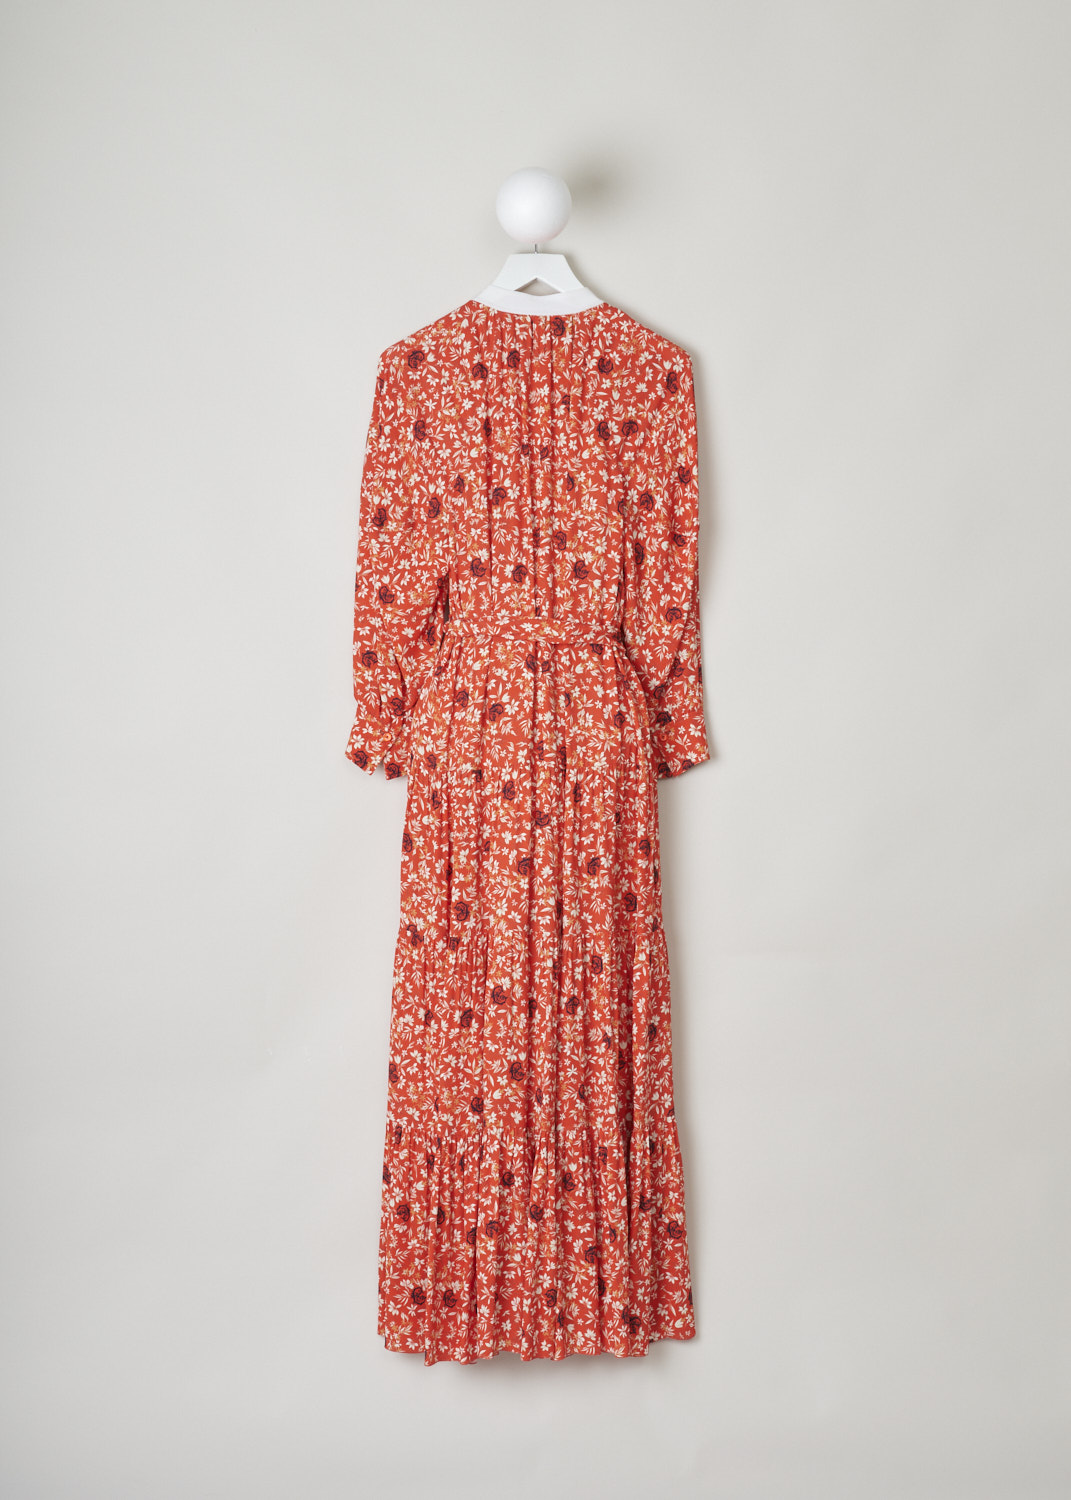 Chloe, Maxi dress in orange adorned with a floral motif, CHC21SRO02331831_831_bubbling_orange, orange, print, back, An oversized maxi length dress. Featuring a white mandarin collar where tiny pleats fall off. The raglan sleeves are wide, long and cuffed with a single button. Further decorating the front is the fastening option in the form of buttons. The skirt is paneled and does flare out.  